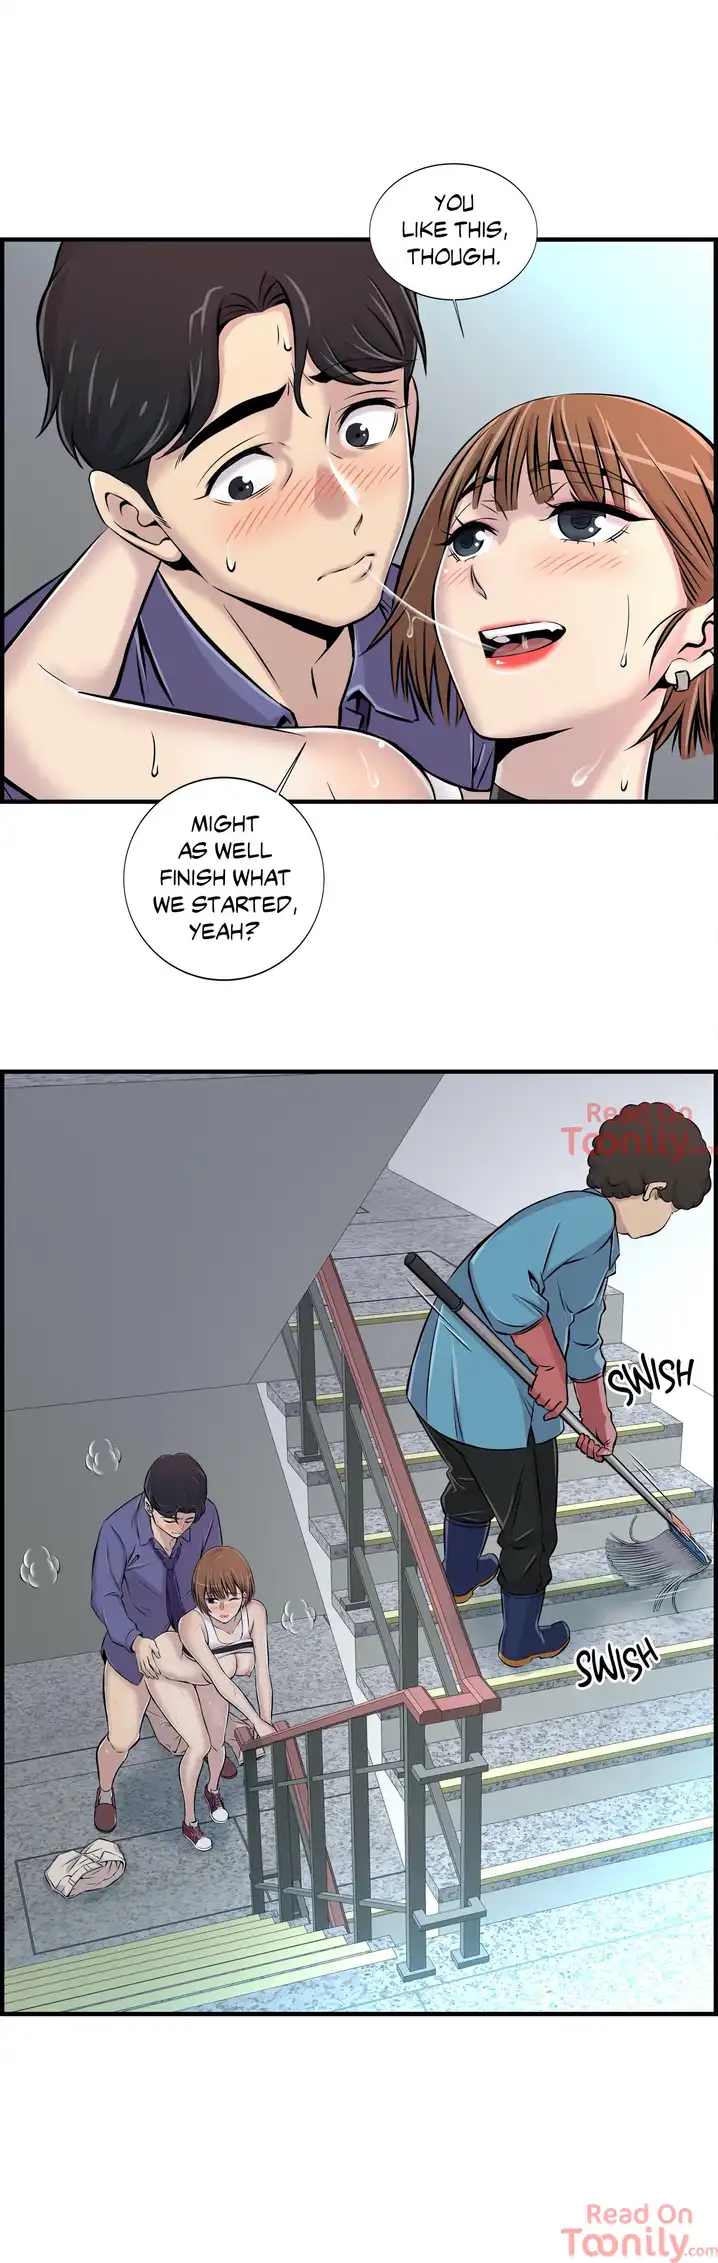 Cram School Scandal - Chapter 5 Page 22